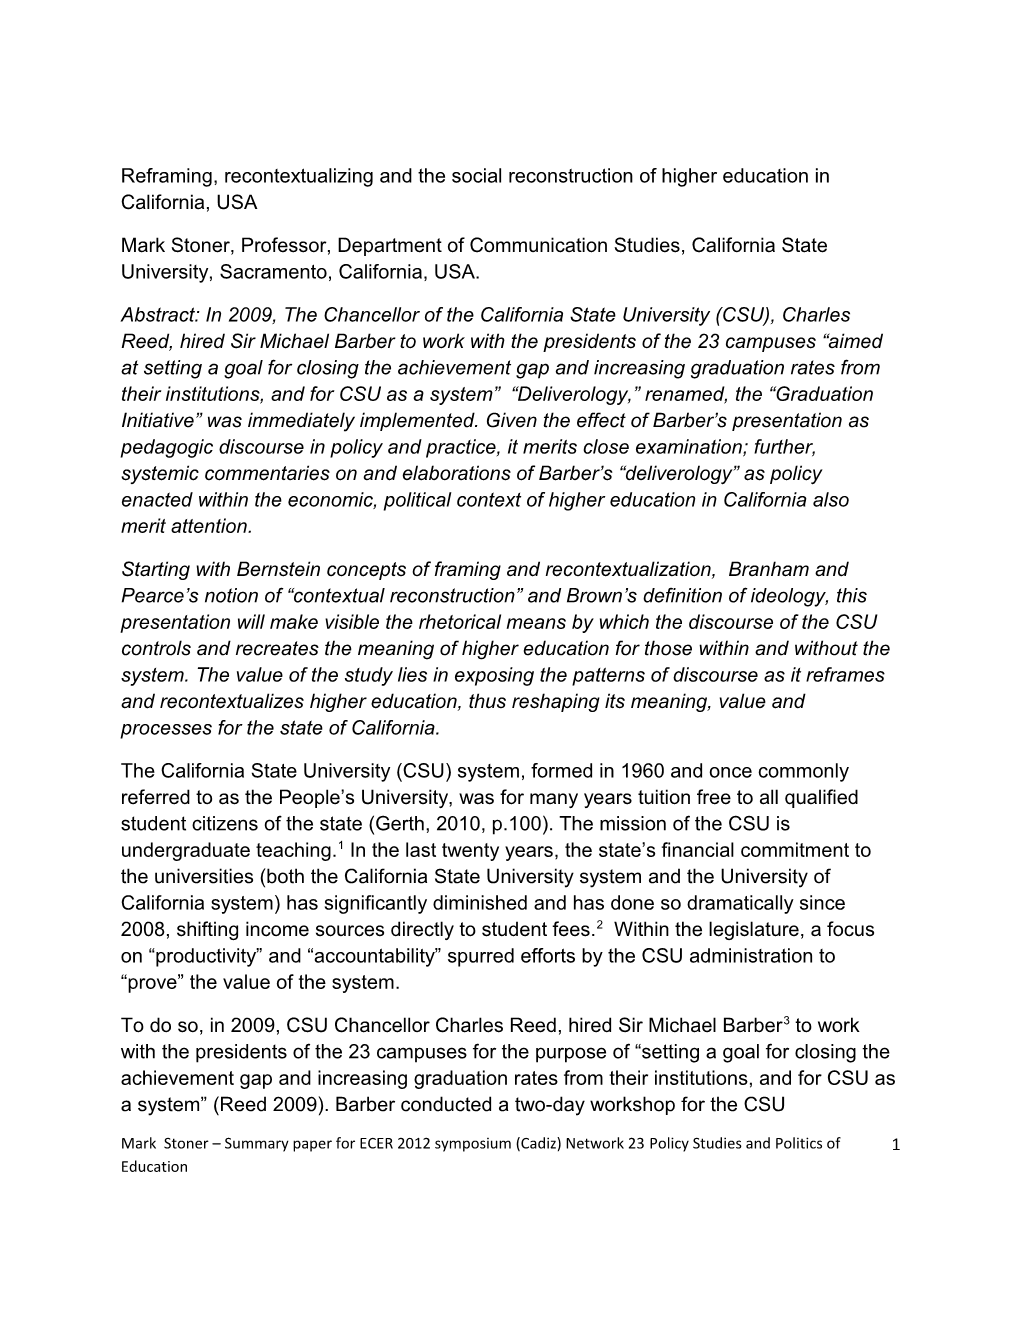 Reframing, Recontextualizing and the Social Reconstruction of Higher Education in California